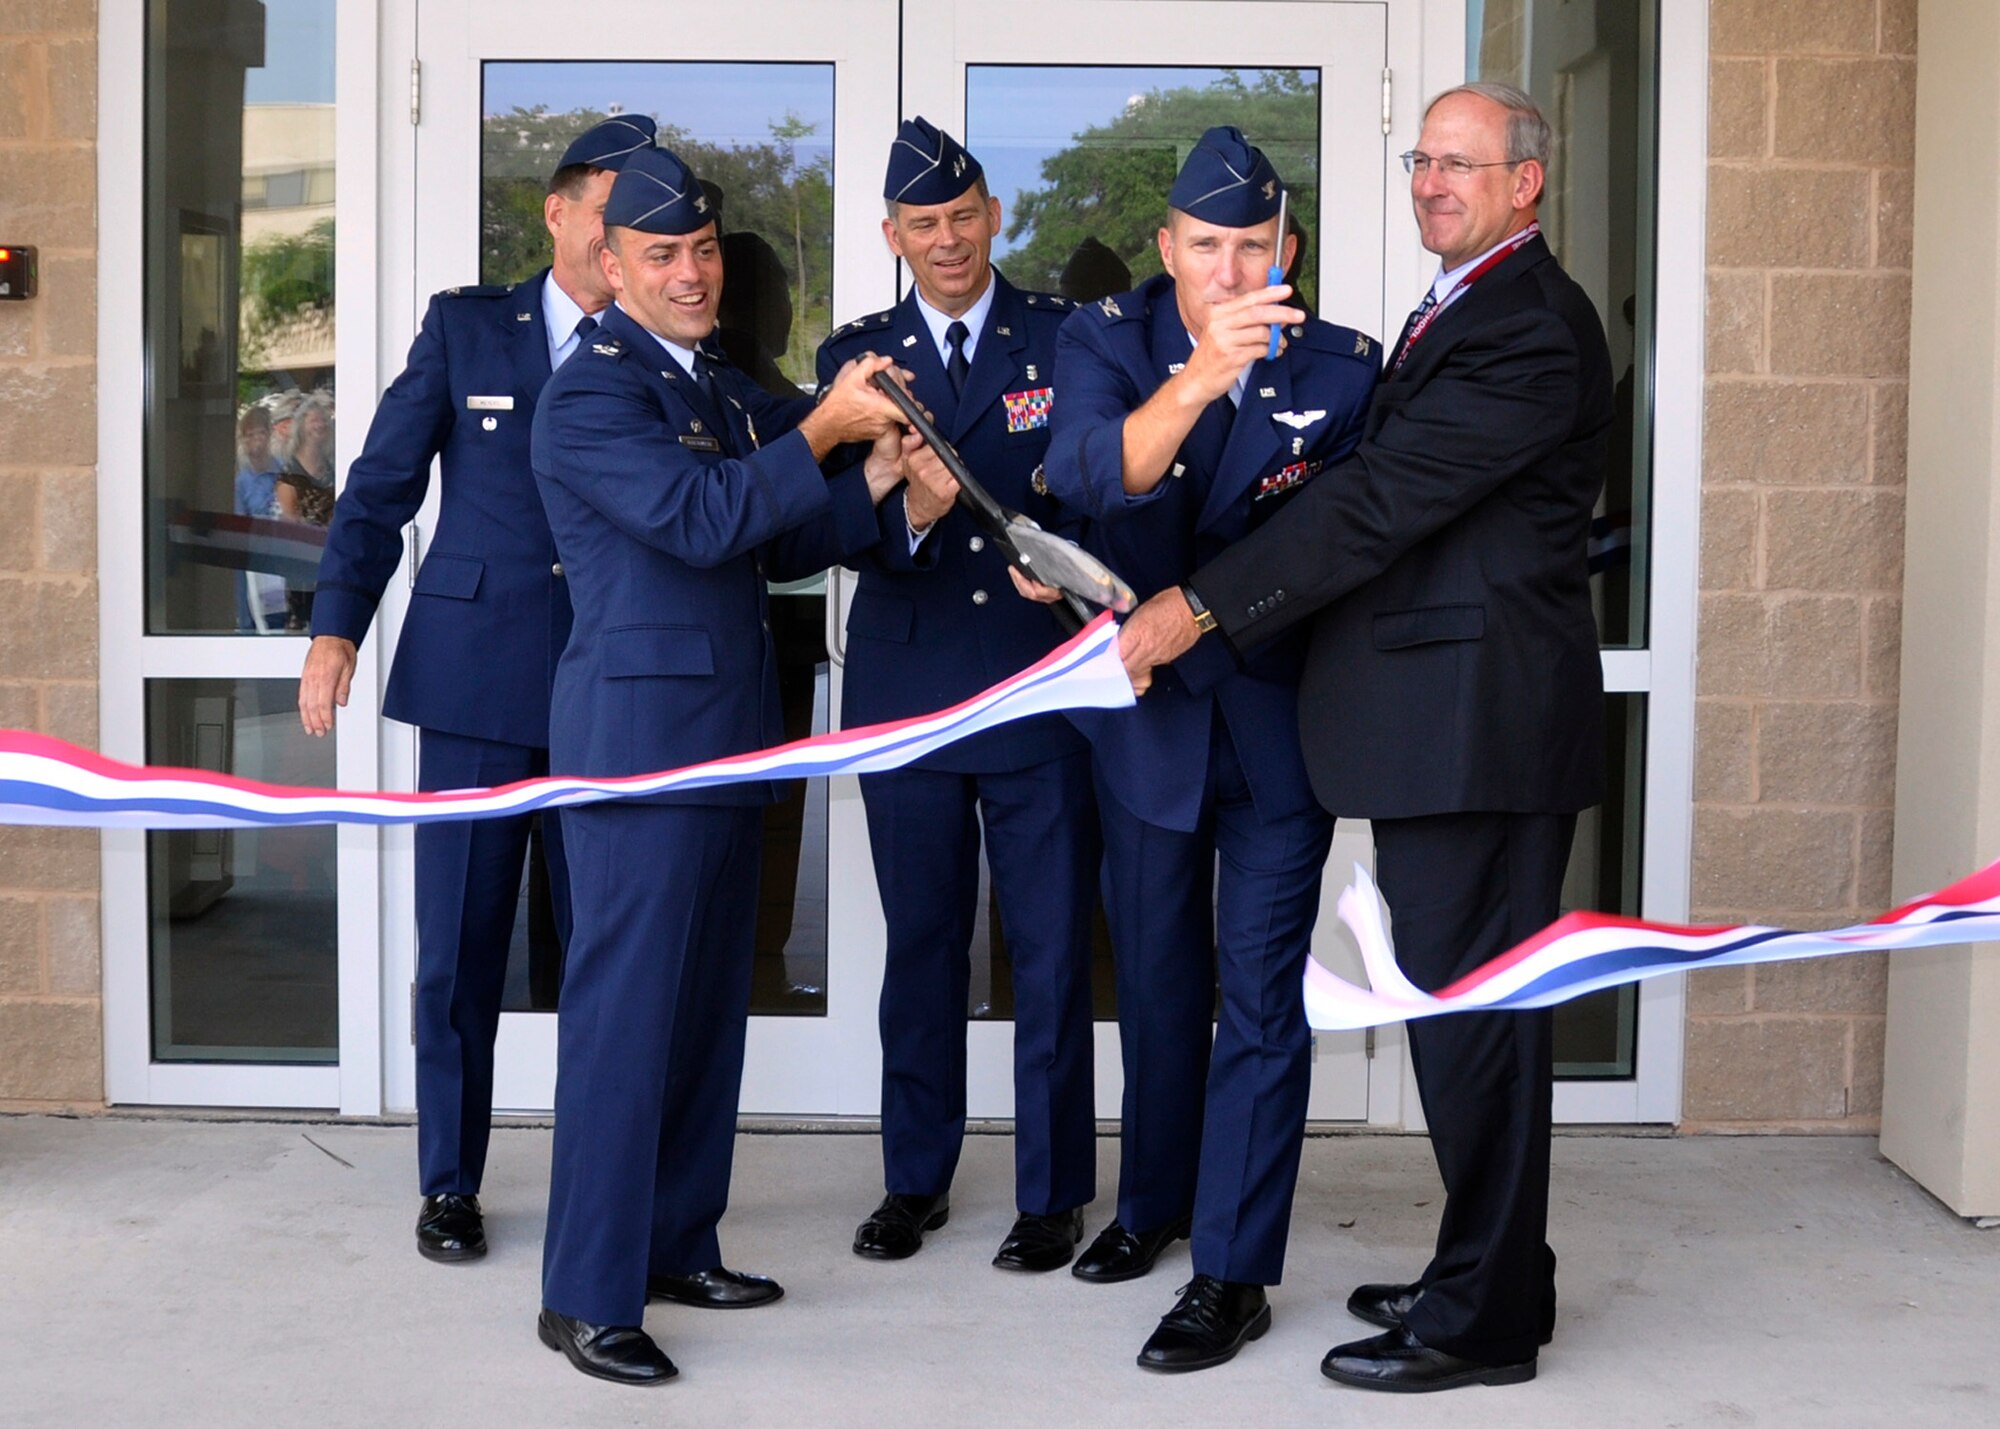 From left, Col. Eric Meyers, 96th Dental Squadron commander; Col. Sal Nodjomian, 96th Air Base Wing commander; Maj. Gen. Gerard Caron, Air Force Assistant Surgeon General for Dental Services; Col. Gary Walker, 96th Medical Group commander and Tom Wisnieski, Director of Veterans Affairs, Gulf Coast Health Systems, cut the ribbon to open the Eglin Dental Clinic June 7.  (U.S. Air Force photo/Kevin Gaddie) 